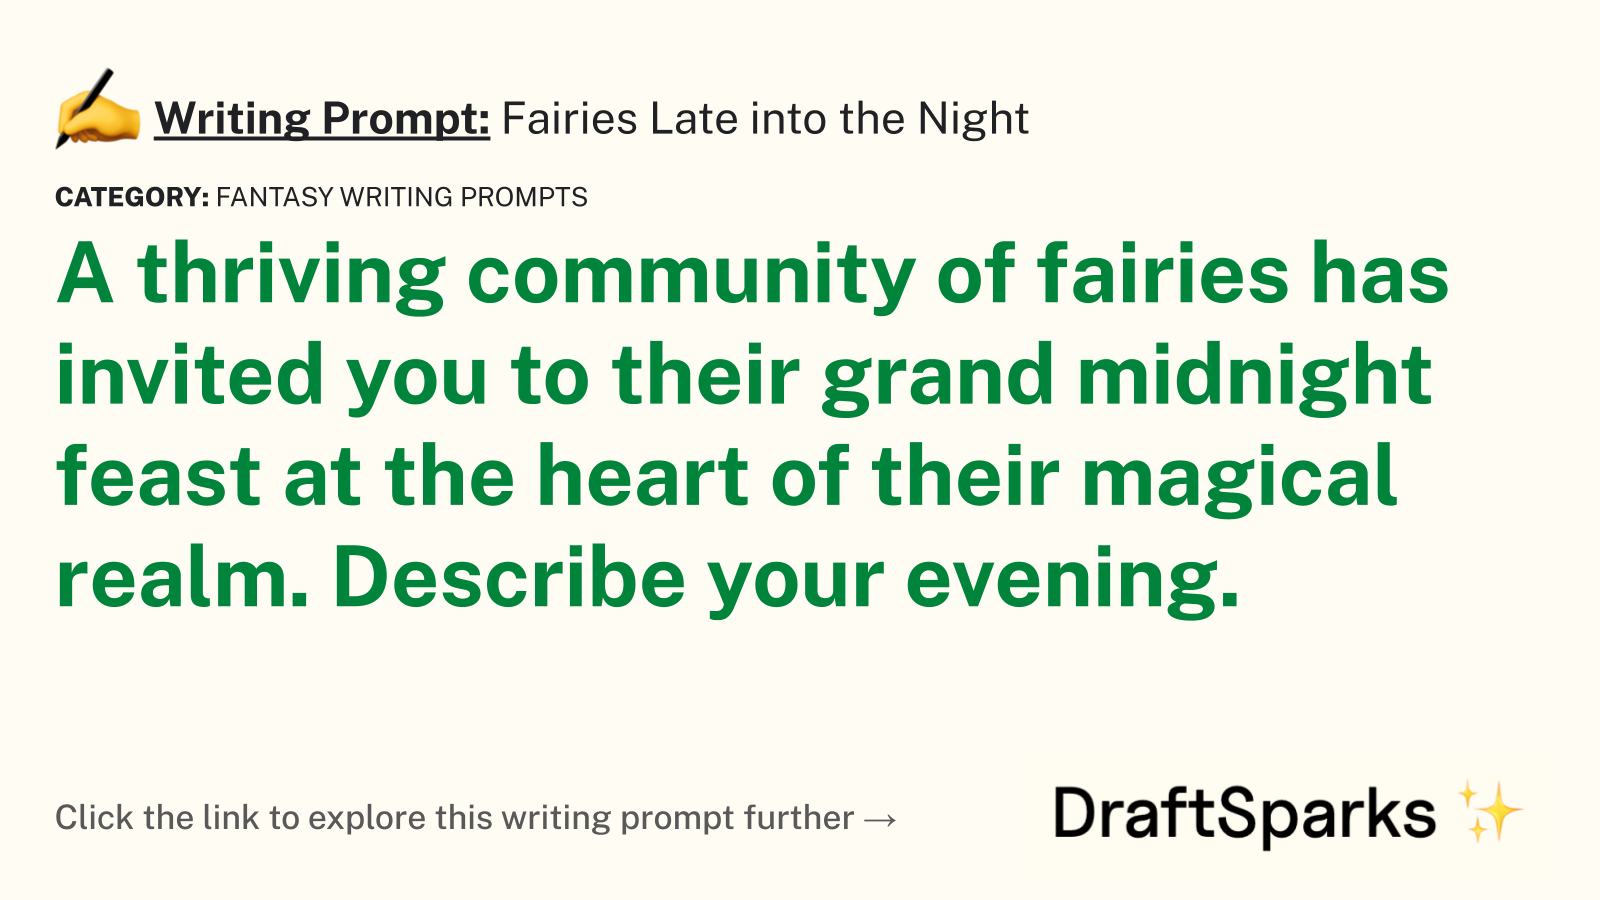 Fairies Late into the Night